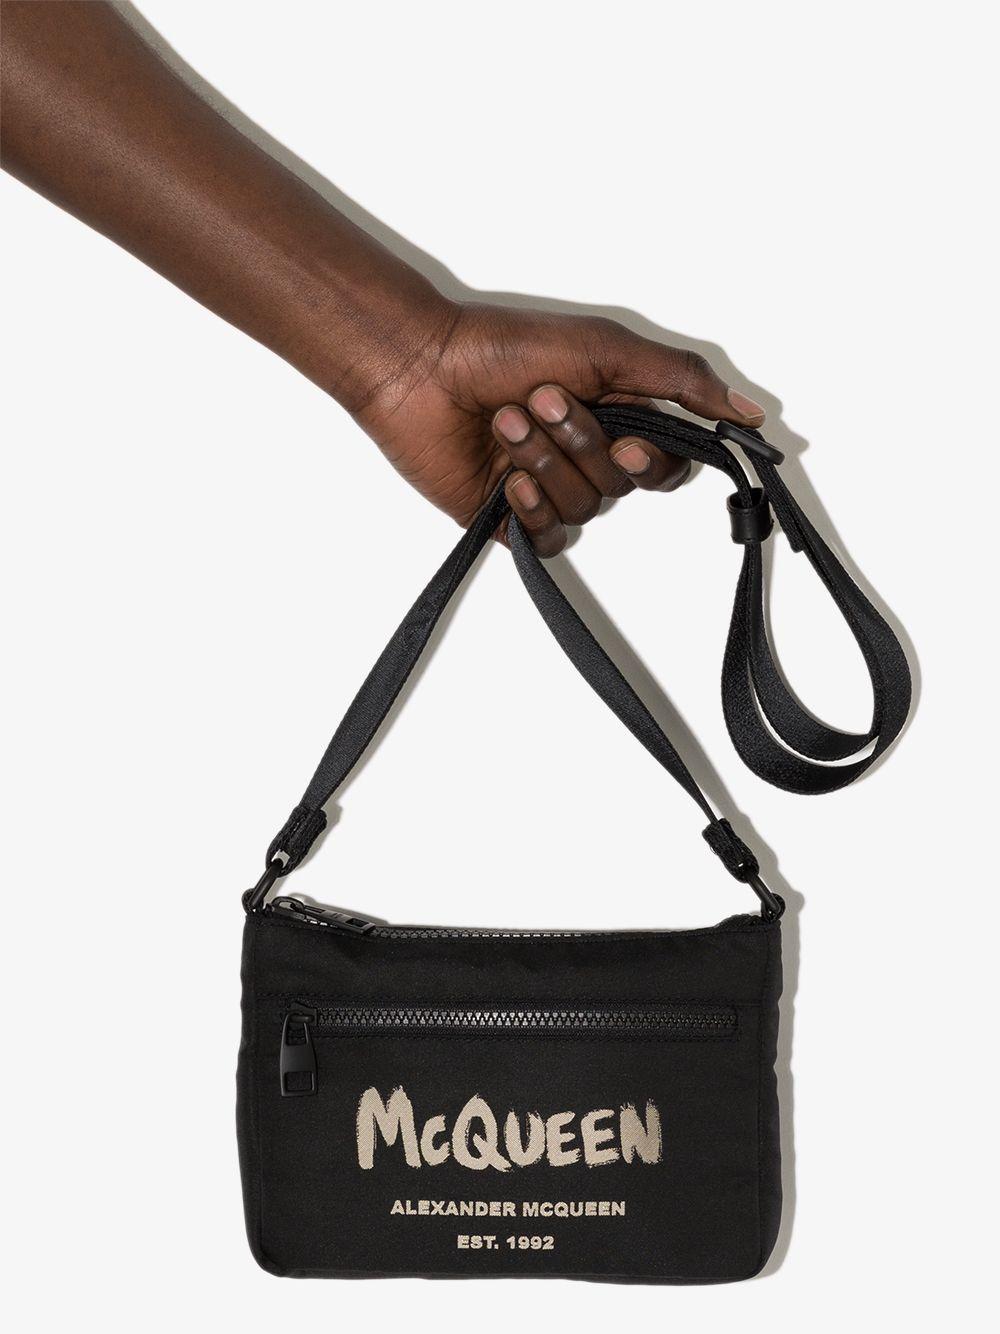 Mens Bags Messenger bags Alexander McQueen Leather The Curve Bucket Bag in Black for Men Save 37% 